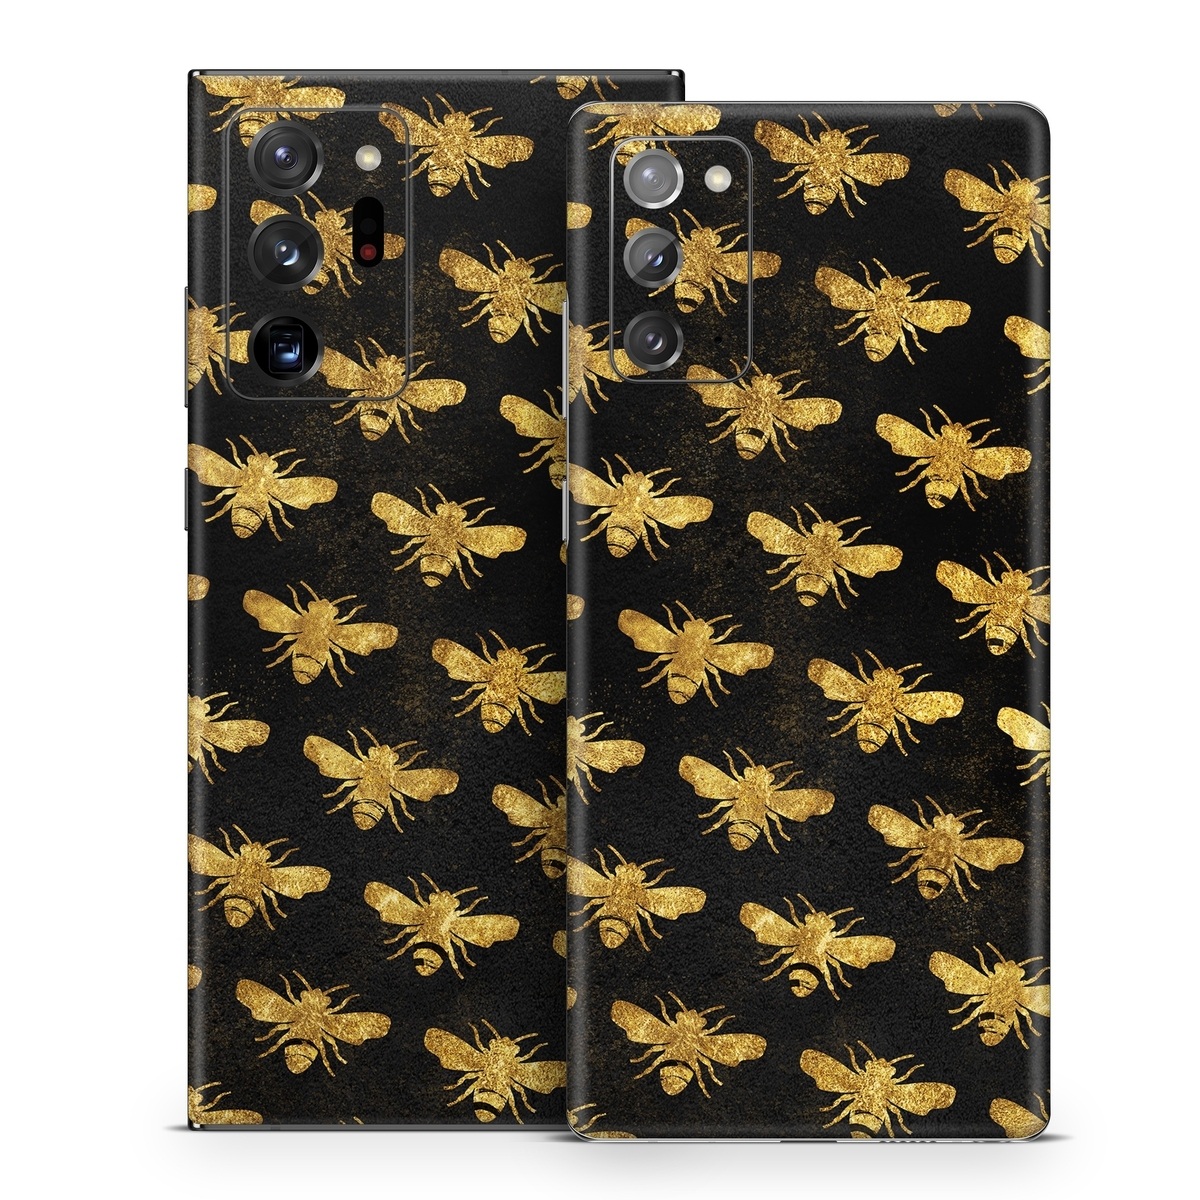 Samsung Galaxy Note 20 Series Skin design of Pattern, Yellow, Flower, Design, Plant, Wildflower, Textile, Metal, with black, yellow colors